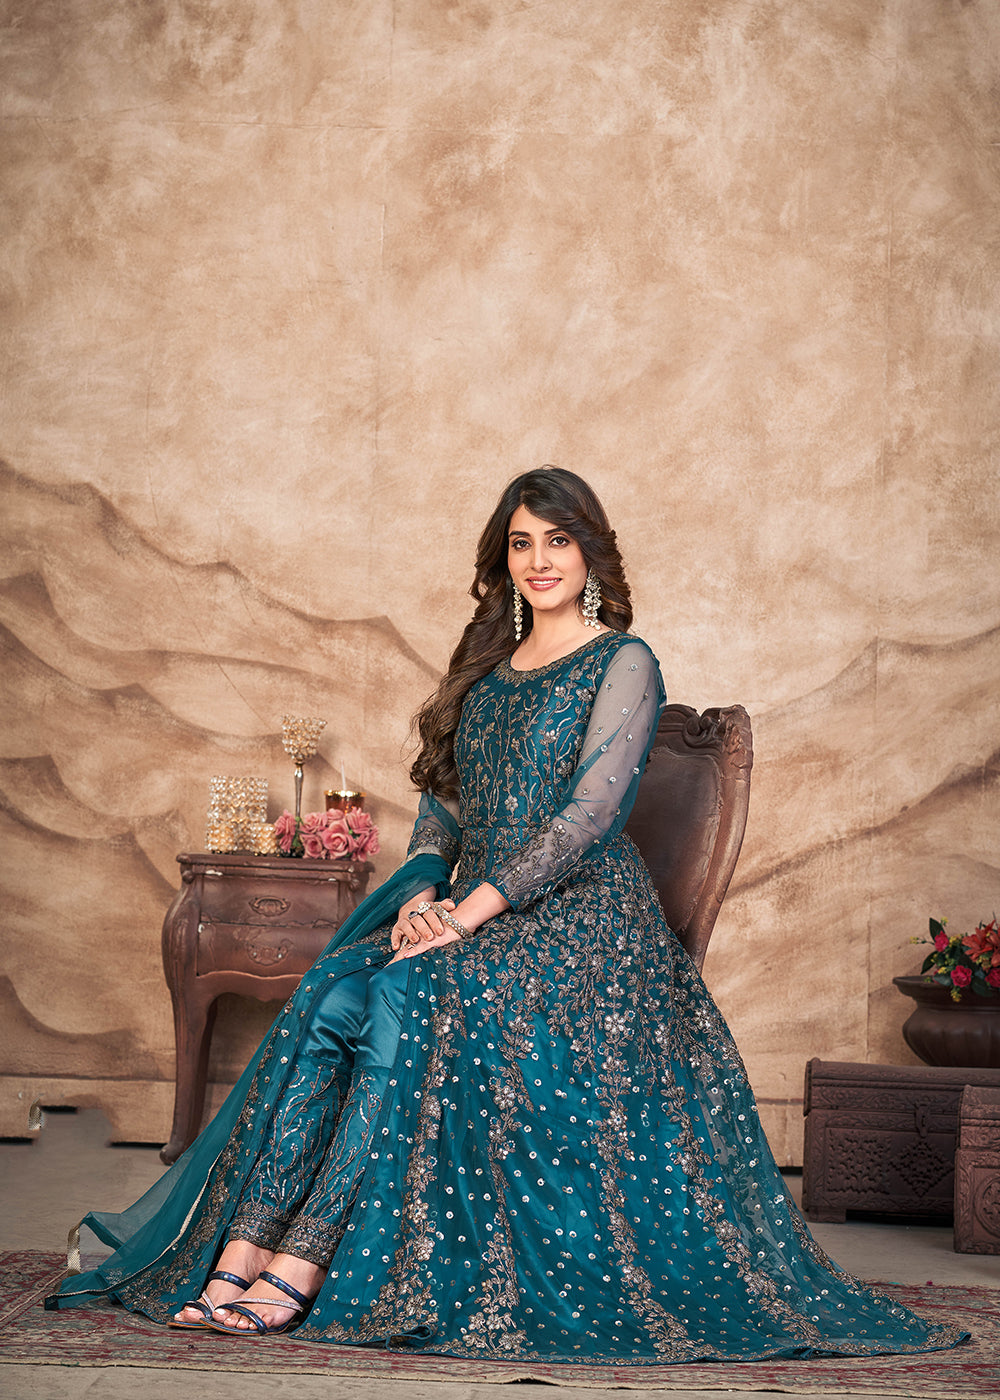 Buy Now Peacock Blue Net Embroidered Pant Style Anarkali Suit Online in USA, UK, Australia, New Zealand, Canada & Worldwide at Empress Clothing. 